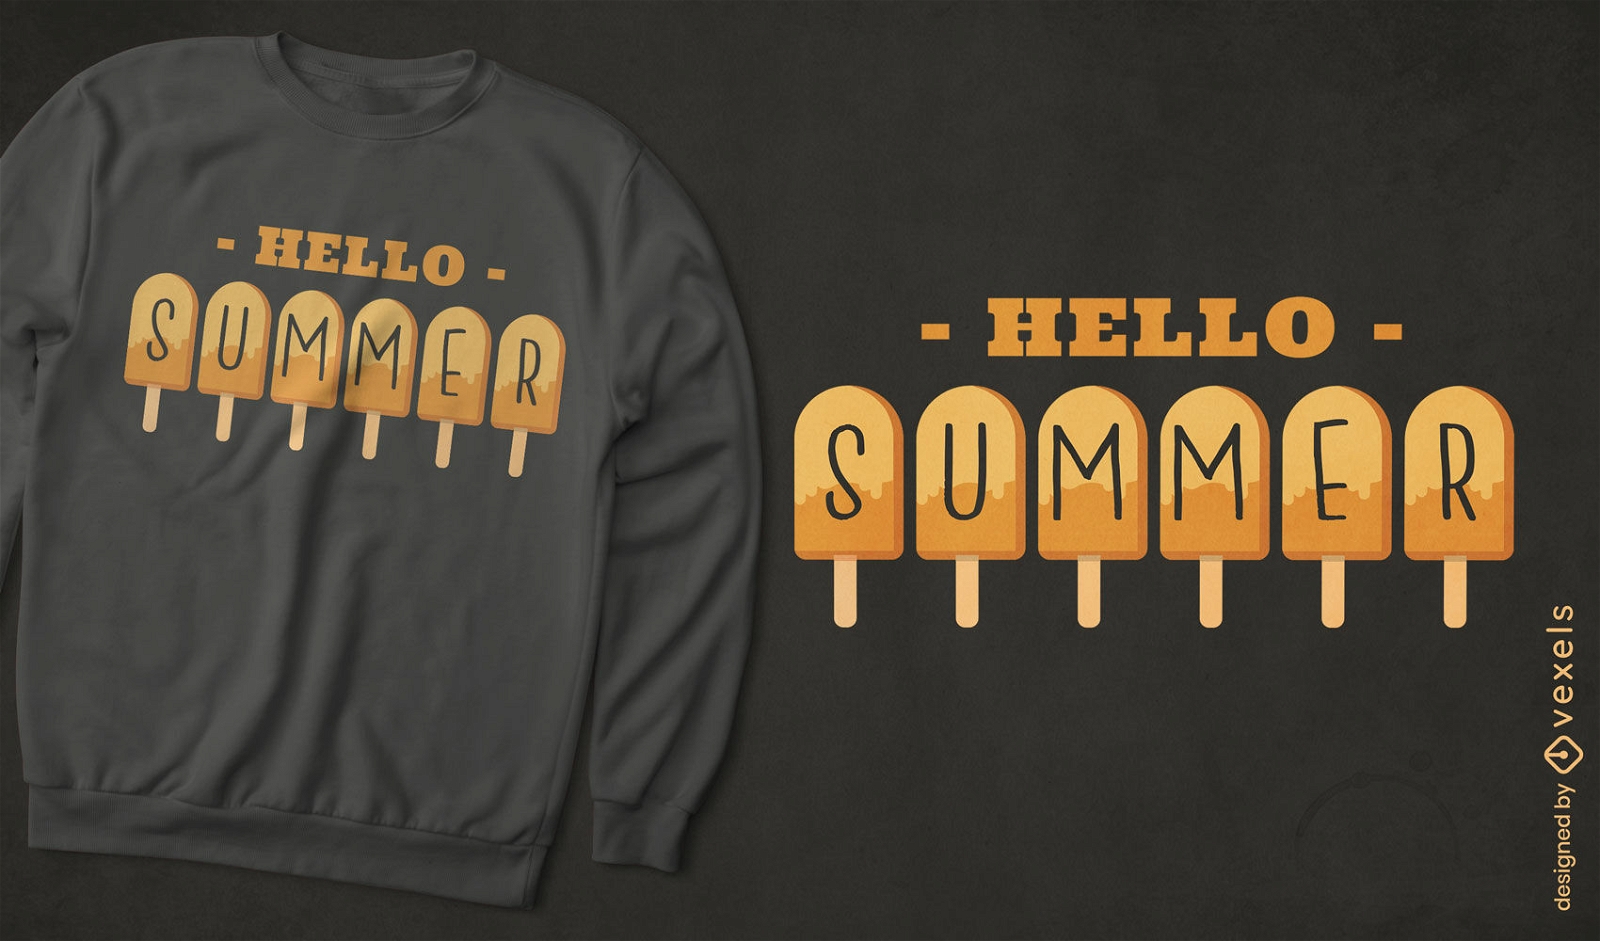 Hello summer popsicles quote t-shirt design